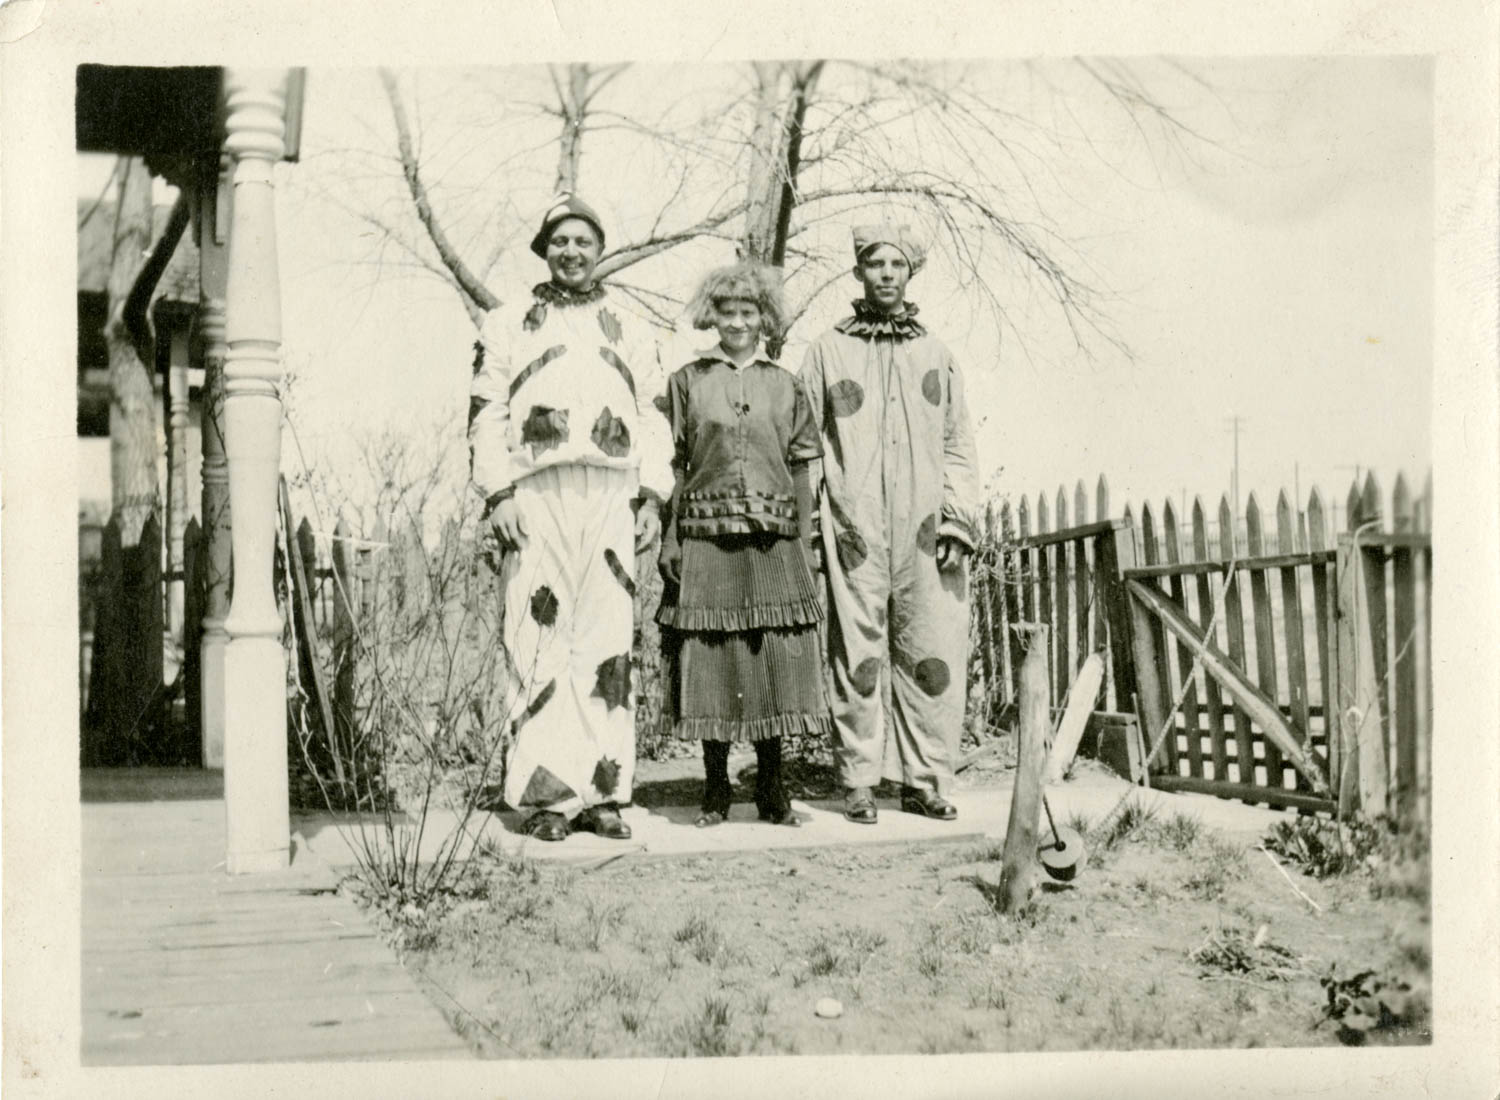 Three individuals dressed as clowns in a vintage Halloween photograph.